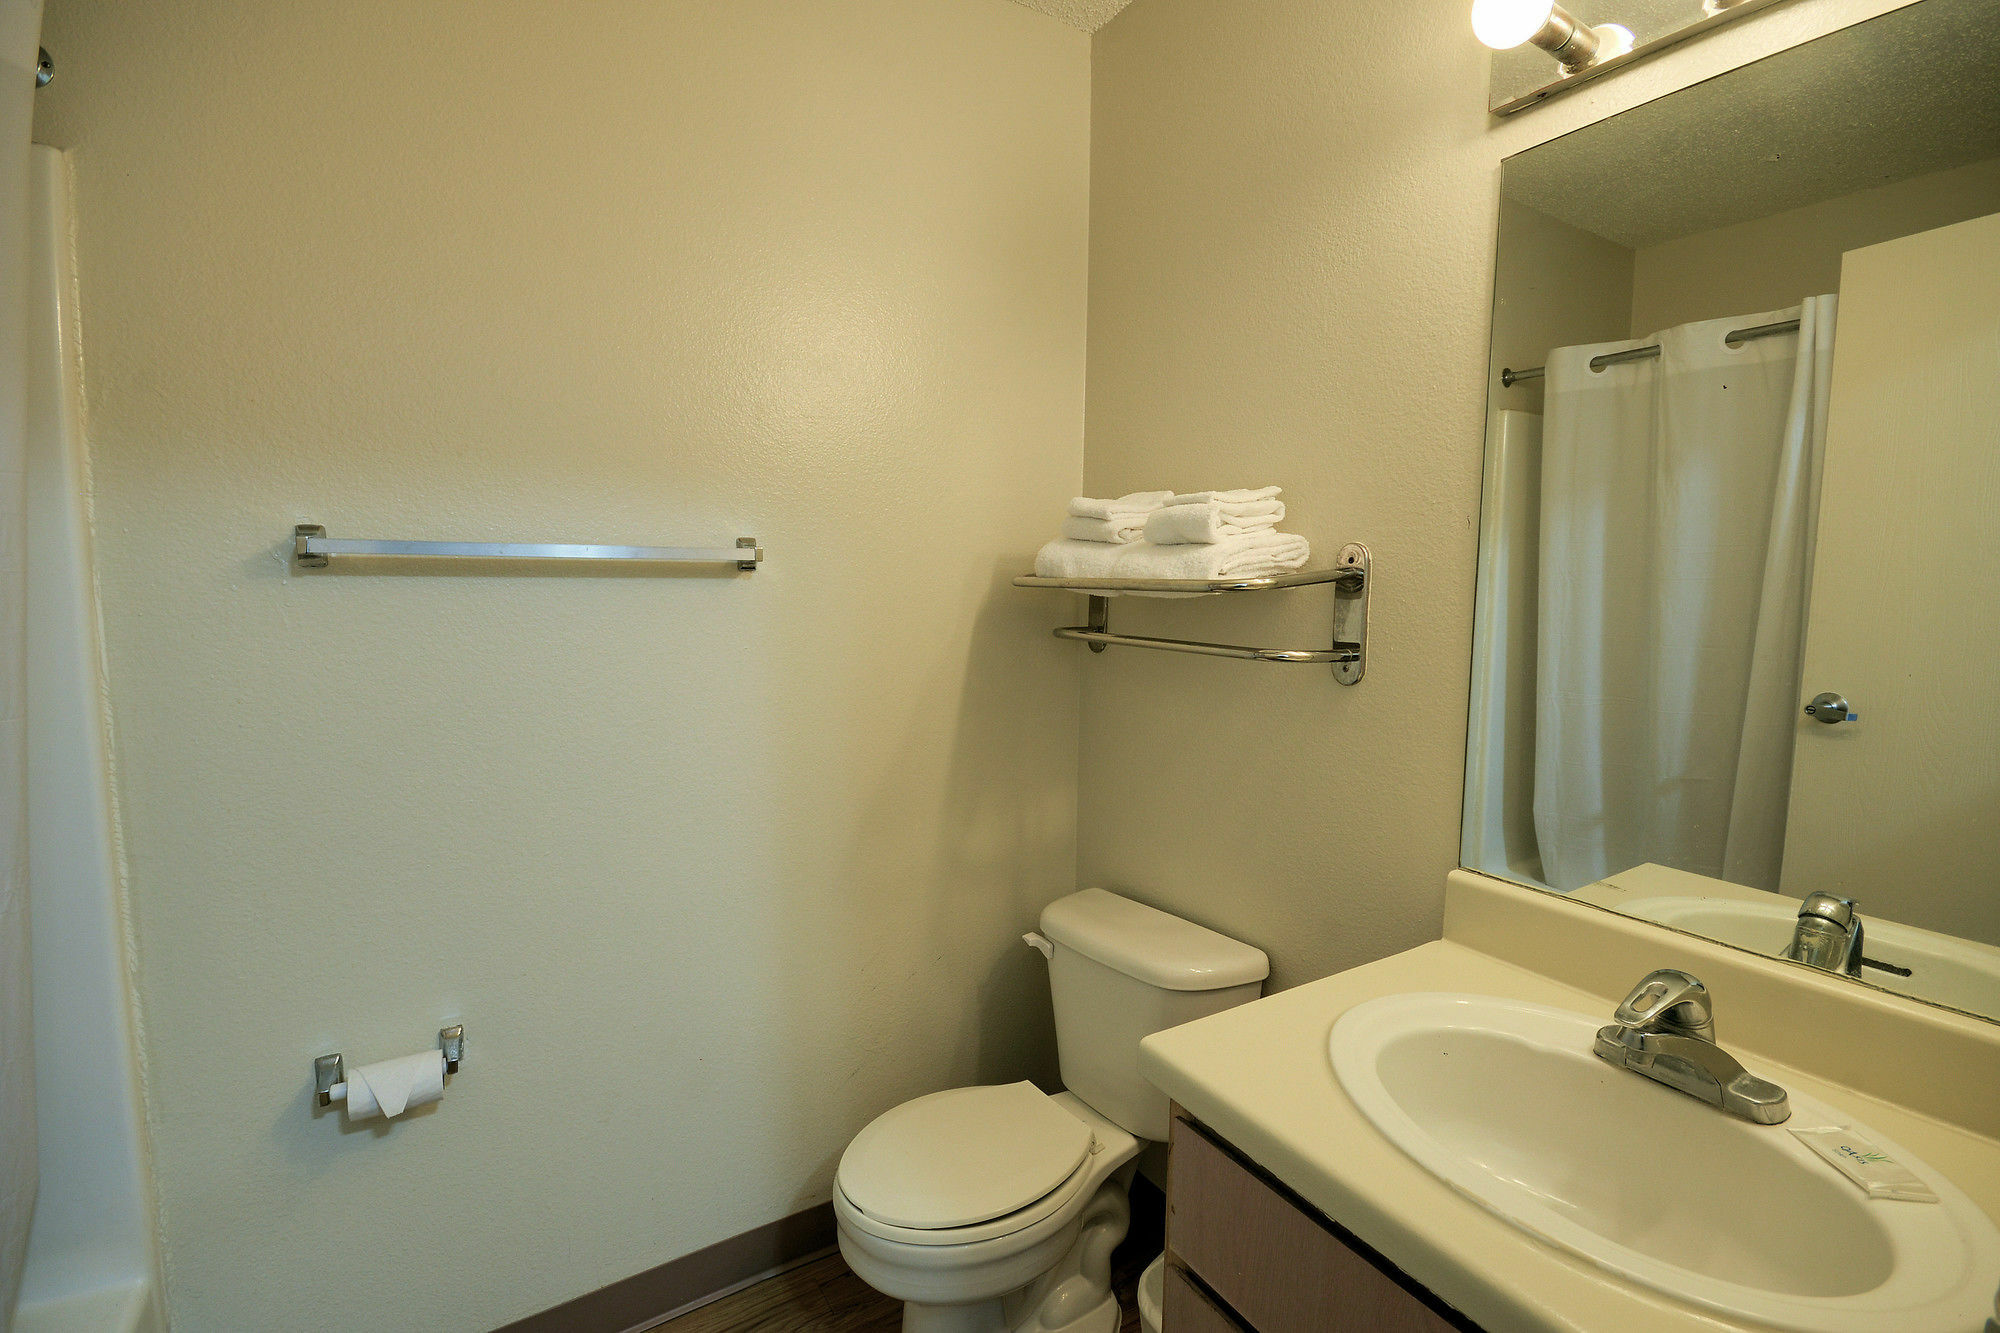 Intown Suites Extended Stay Houston Tx - Westchase Εξωτερικό φωτογραφία